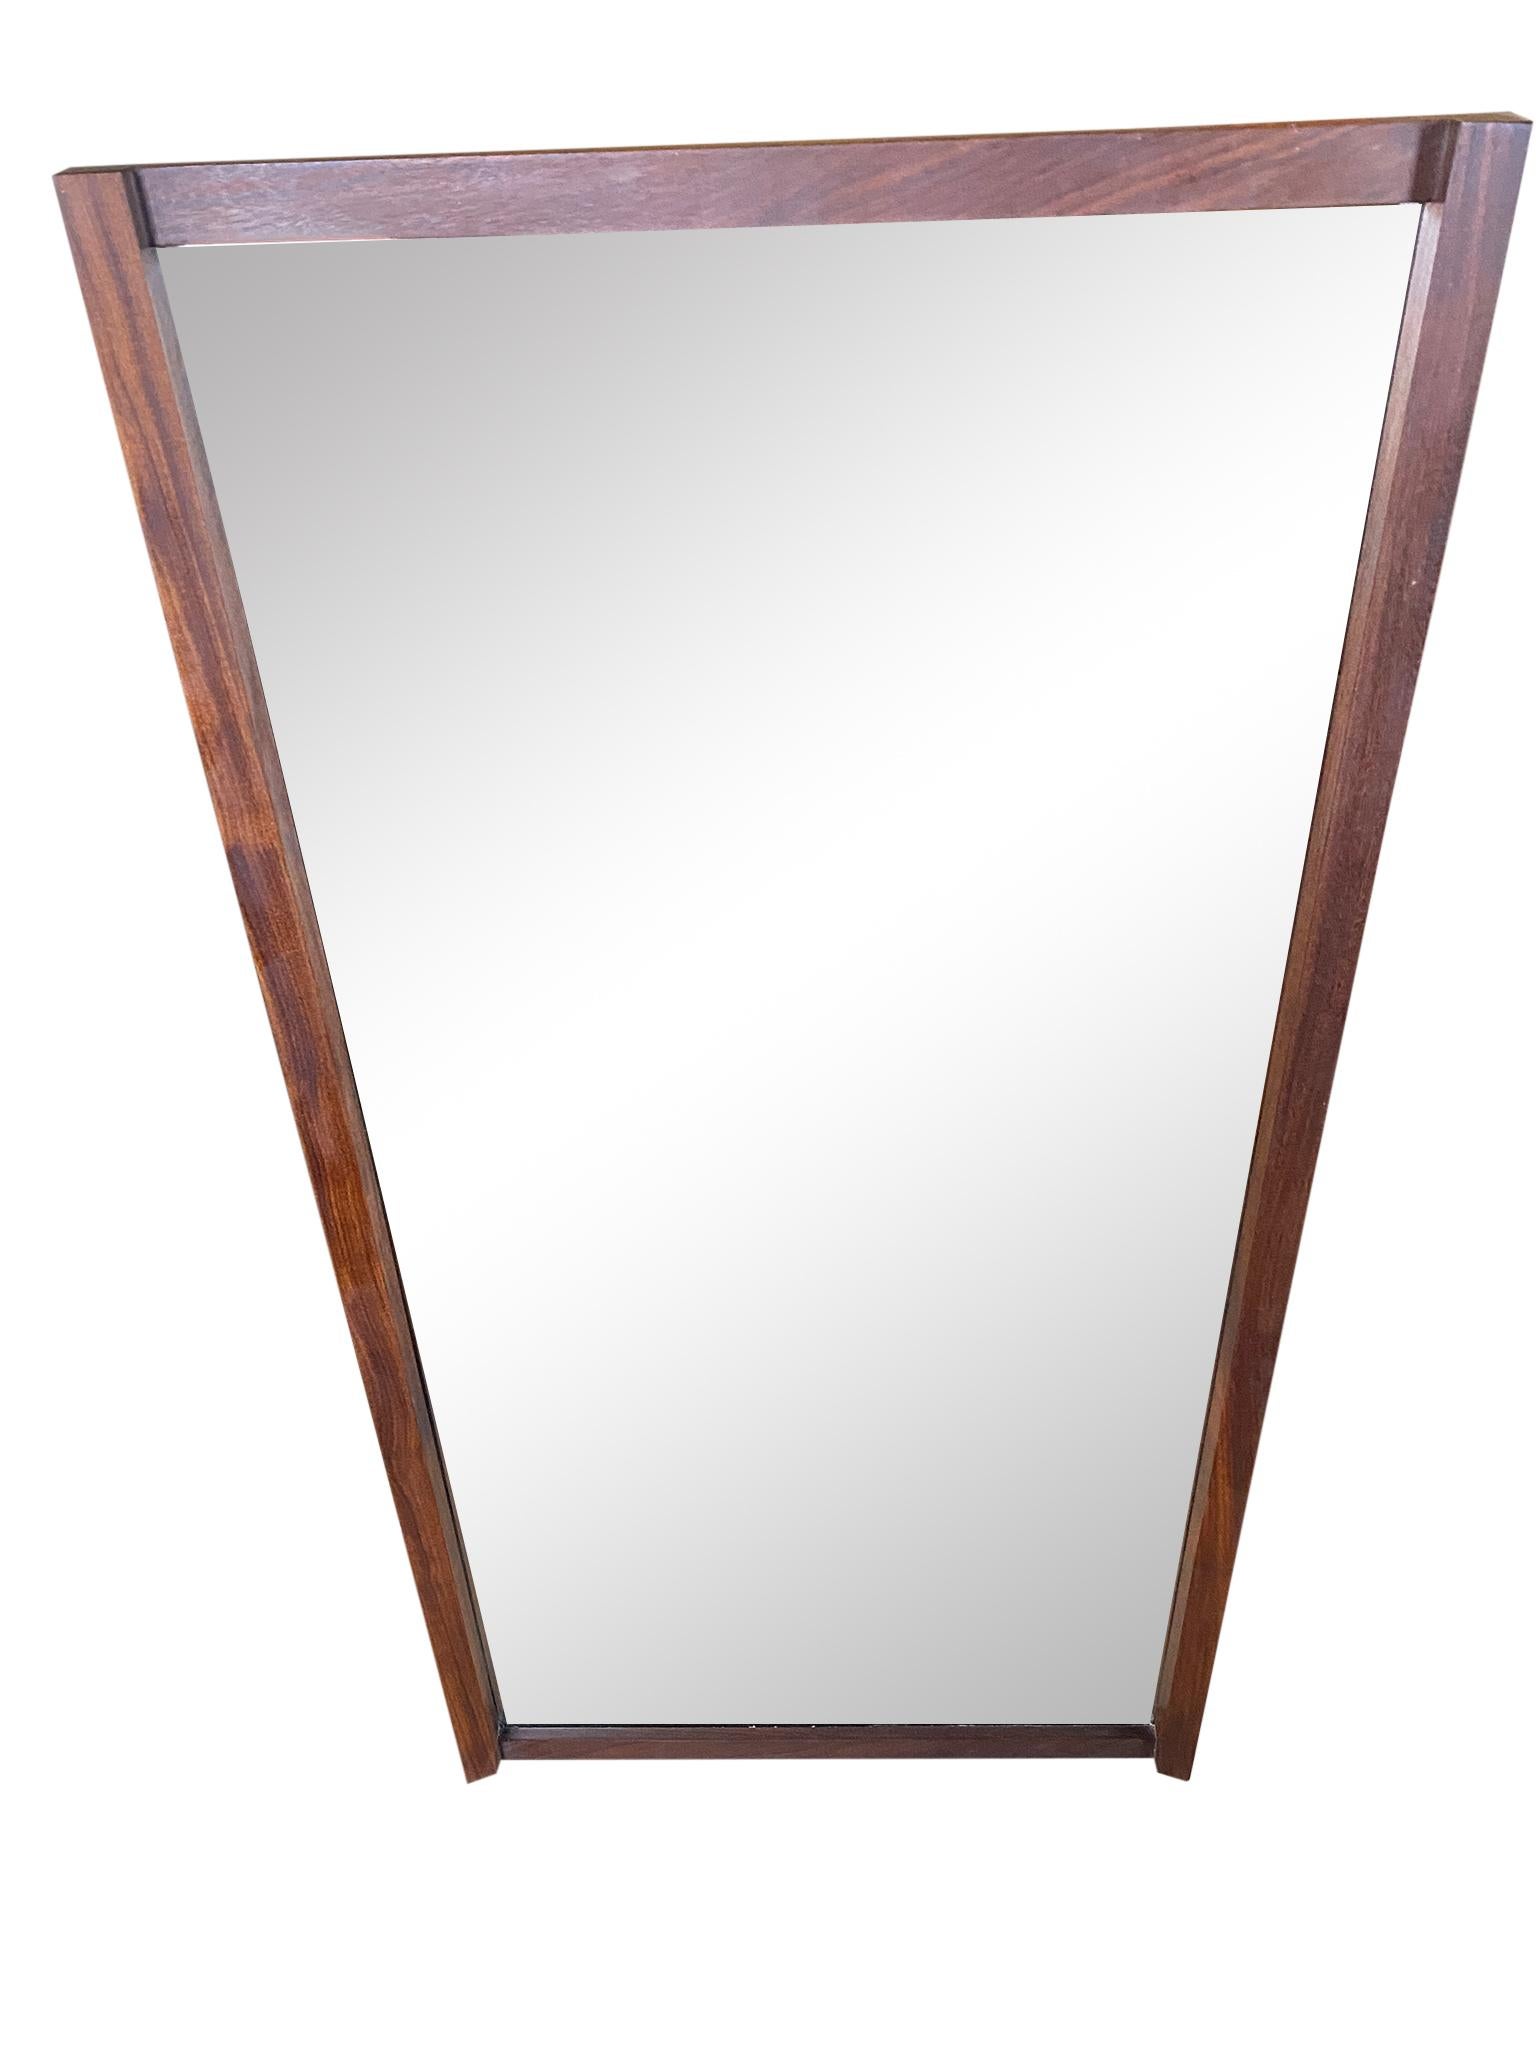 This wonderful Mid-Century Modern walnut mirror designed with amazing tsugite jointry. Style of Nakashima - no label. Wired to hang vertical but can be wired to hang horizontal. Beautiful vintage condition and woodworking.

  